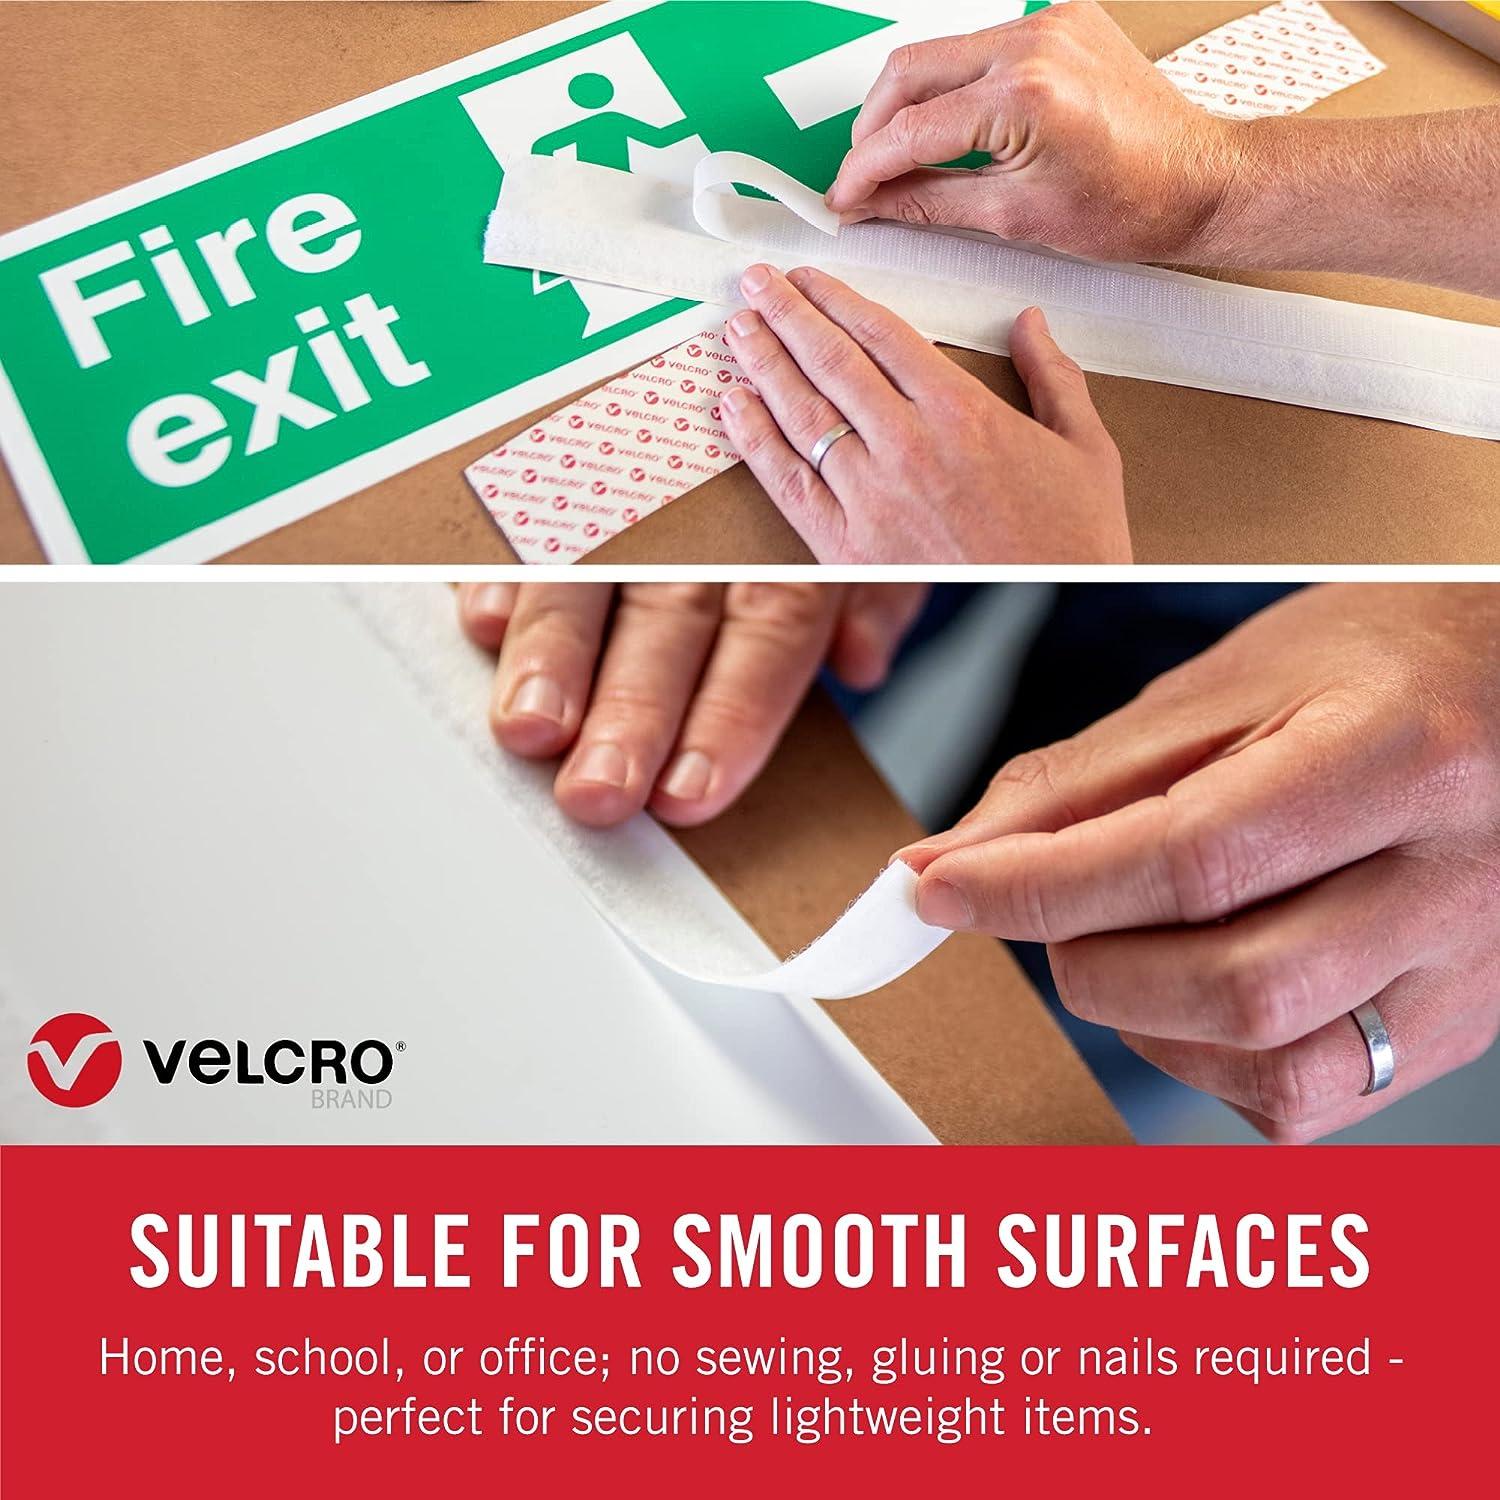 VELCRO Brand - Sticky Back Tape Bulk Roll, 50 ft x 3/4 in, Black, Cut  Hook and Loop Adhesive Strips to Length